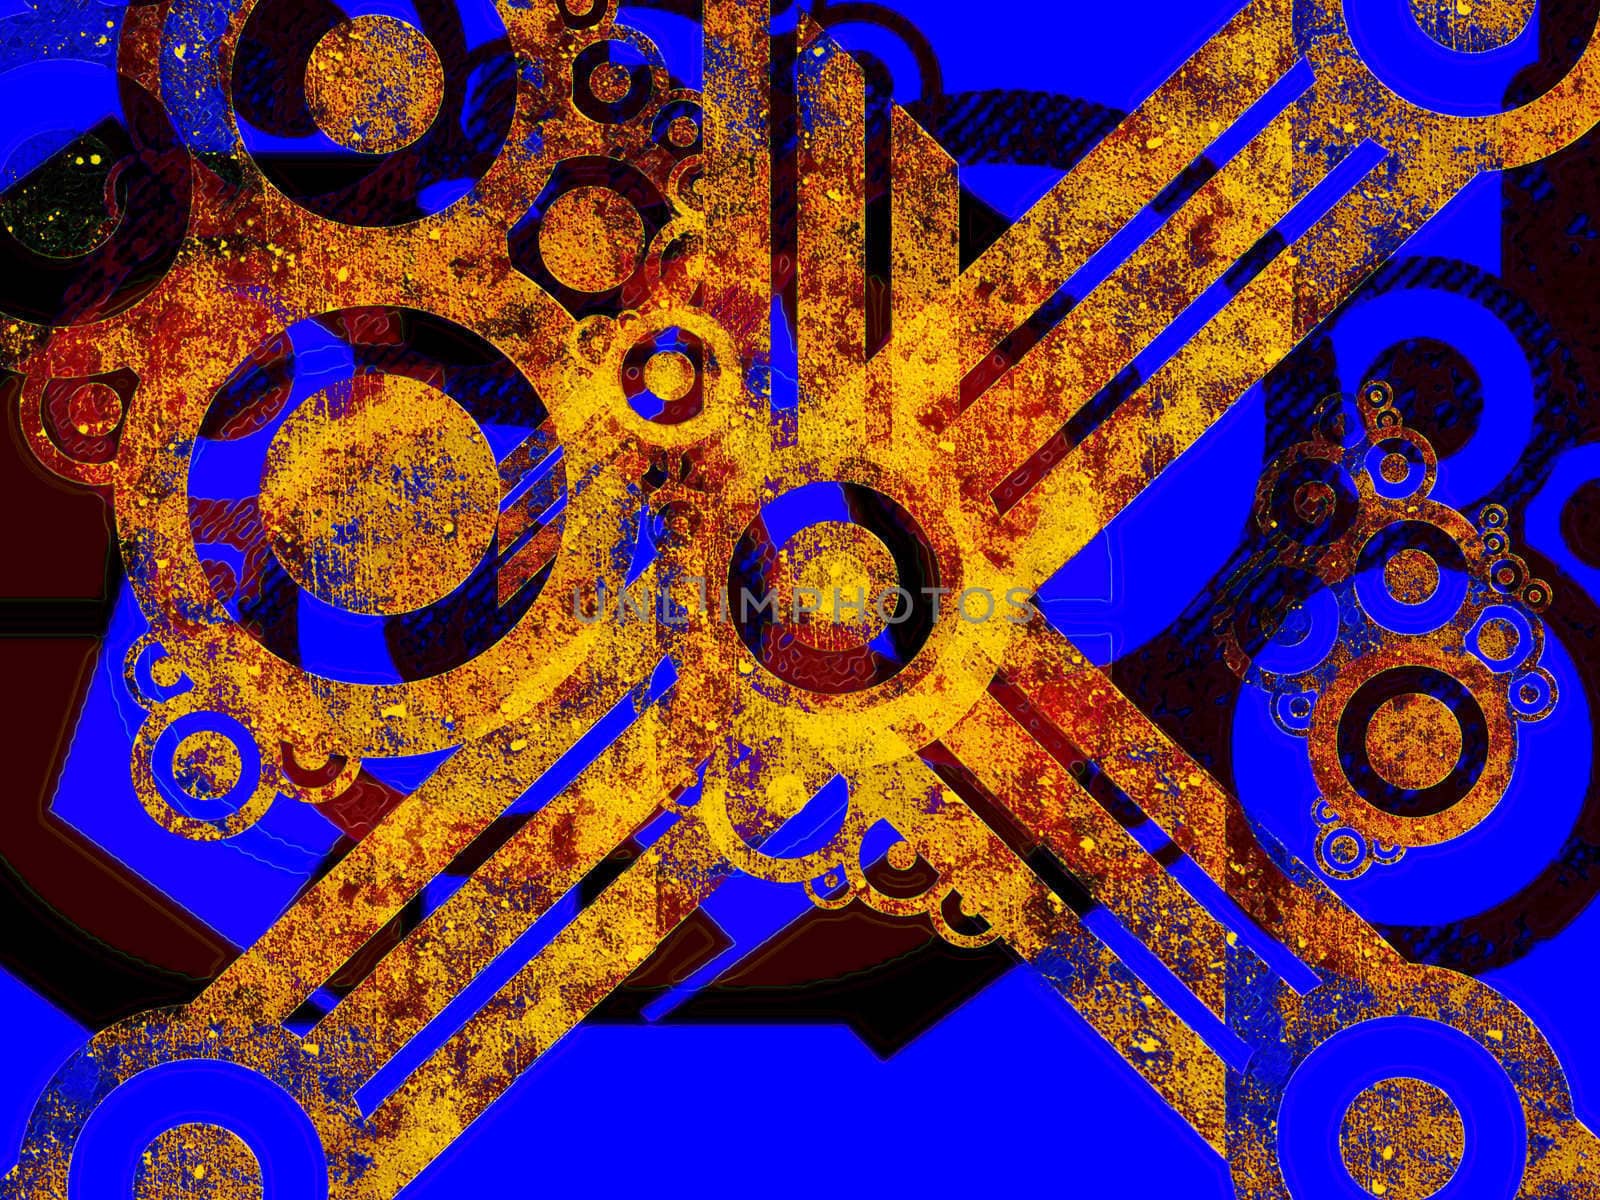 Rusted Industrial Machine Parts over Blue Abstract Illustration